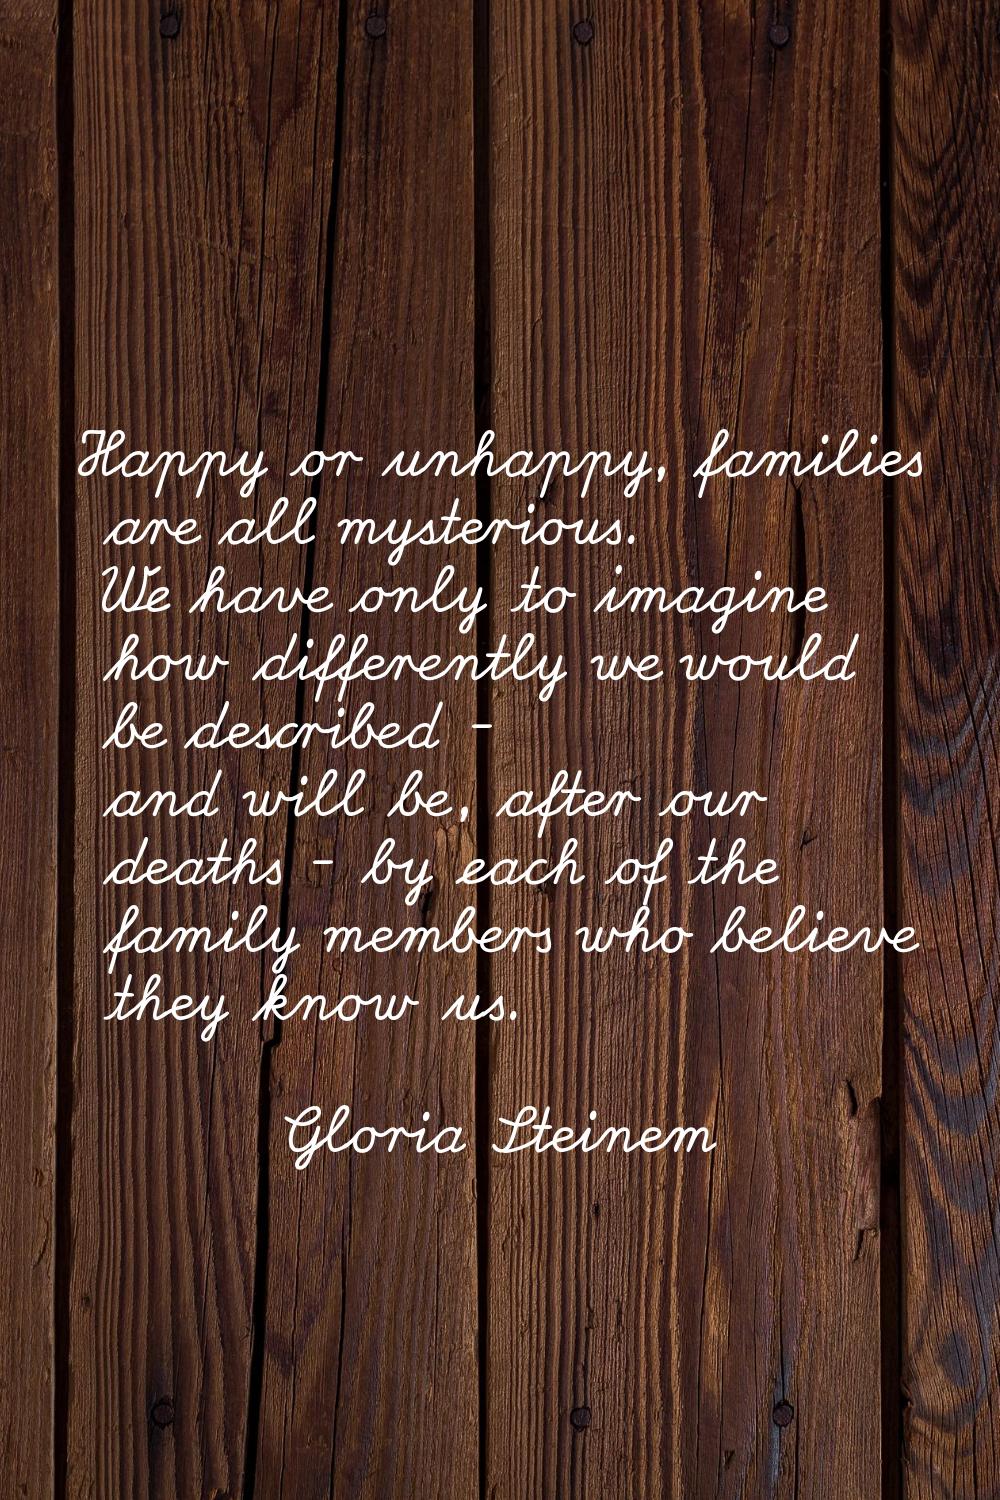 Happy or unhappy, families are all mysterious. We have only to imagine how differently we would be 